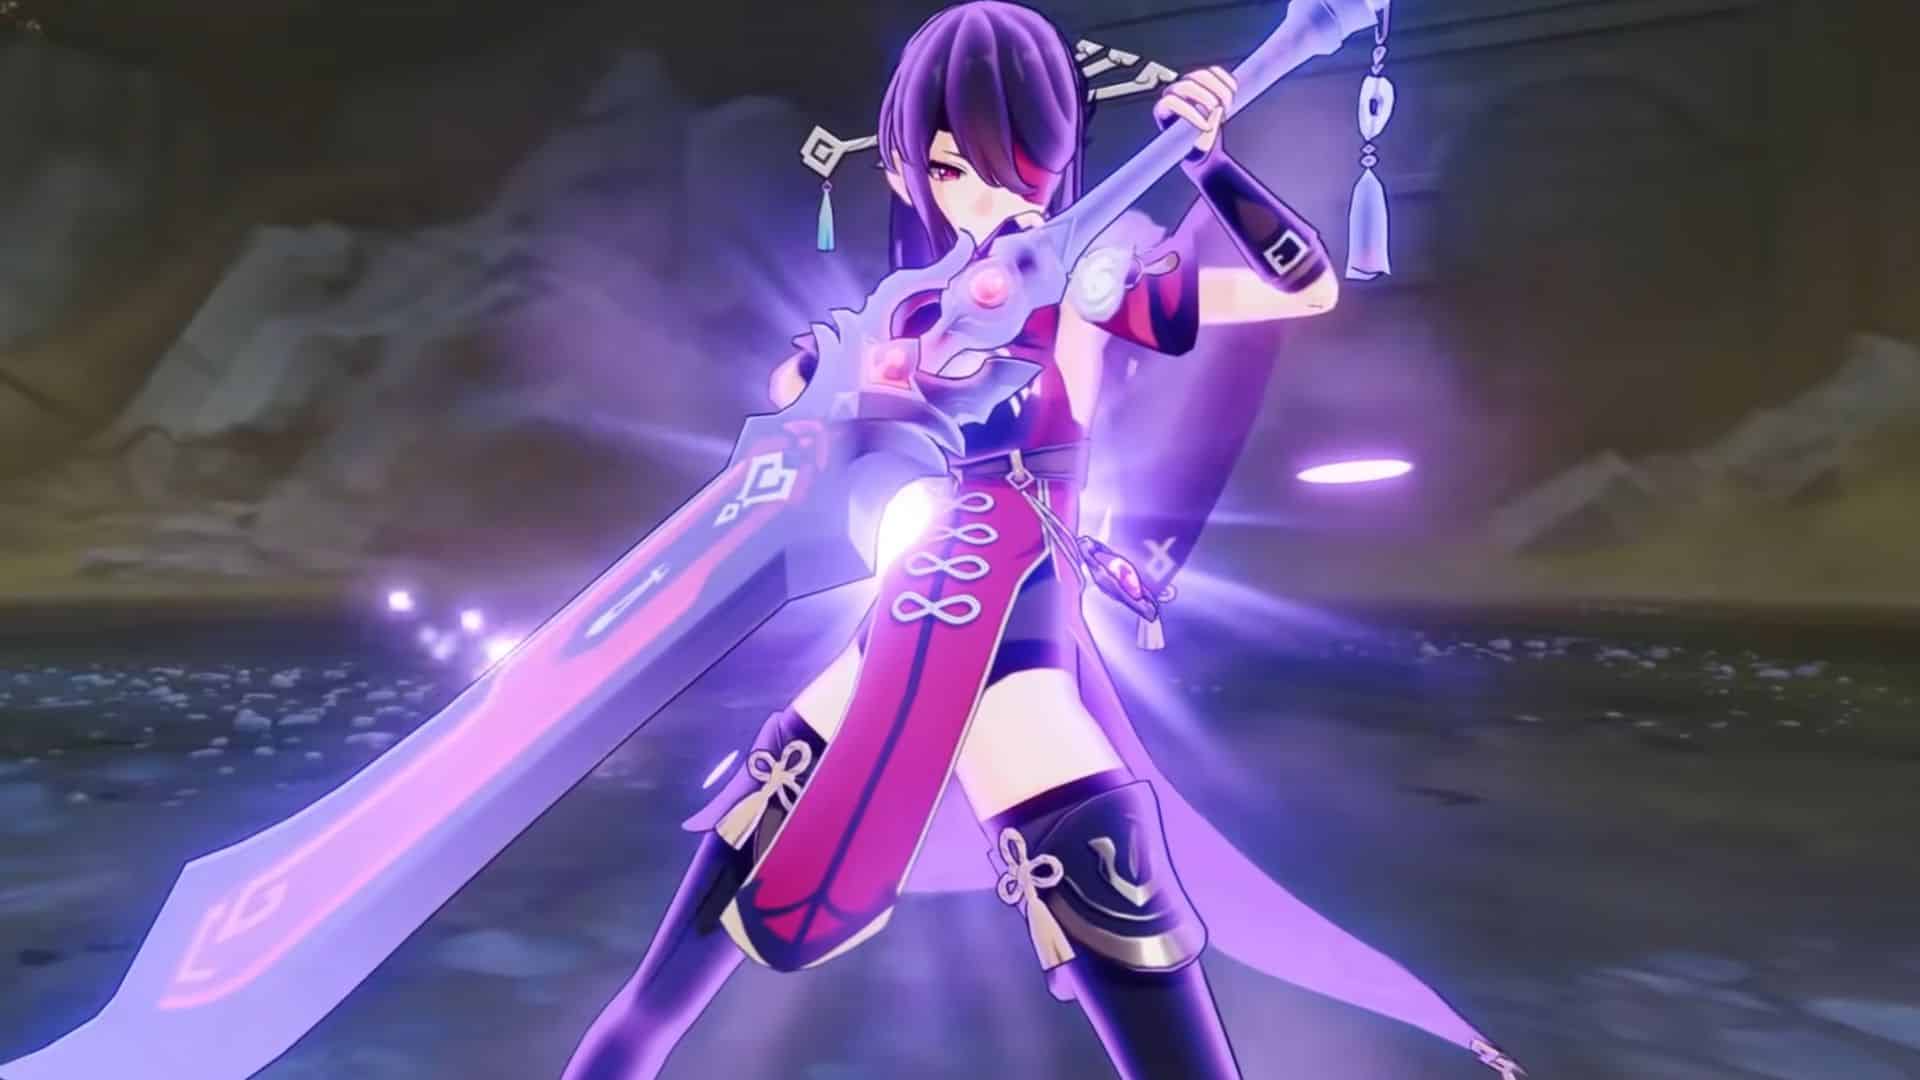 Beidou using her parry ability